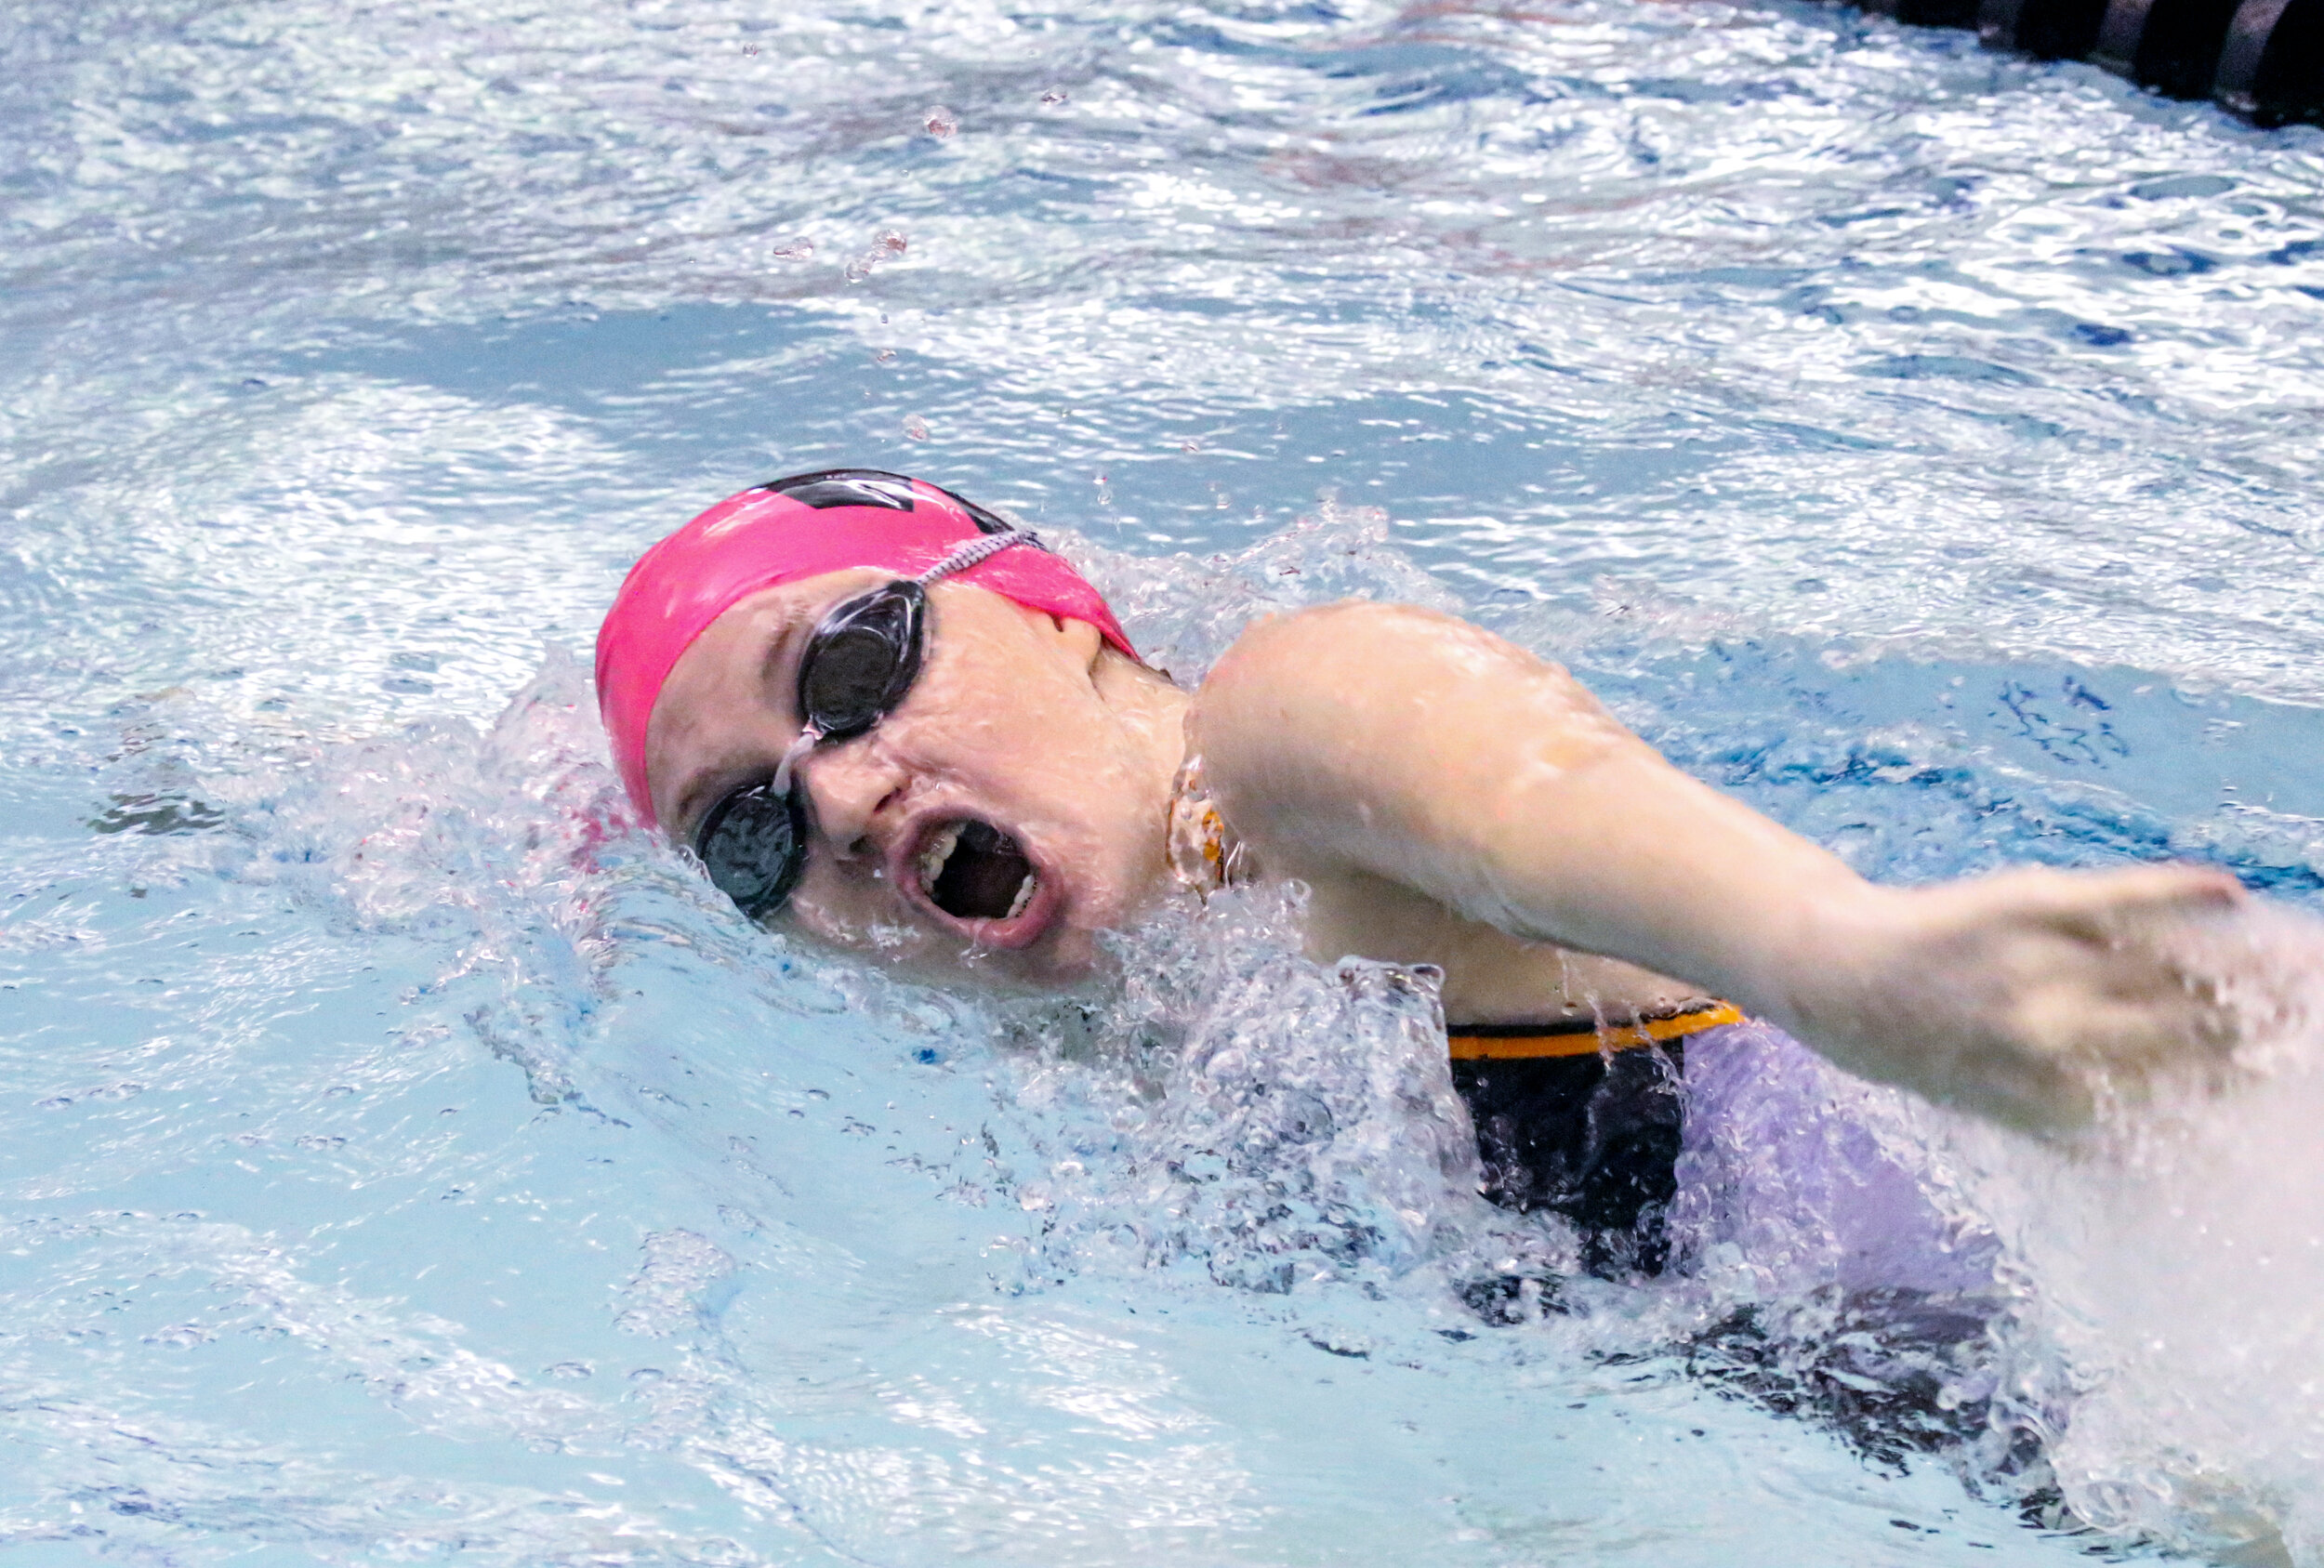  Wellsville’s Megan VanEtten takes in a fresh breath of air during the 50 freestyle event of Saturday morning’s regular season finale against Hornell, in Wellsville. [Chris Brooks/WellsvilleSports.com] 